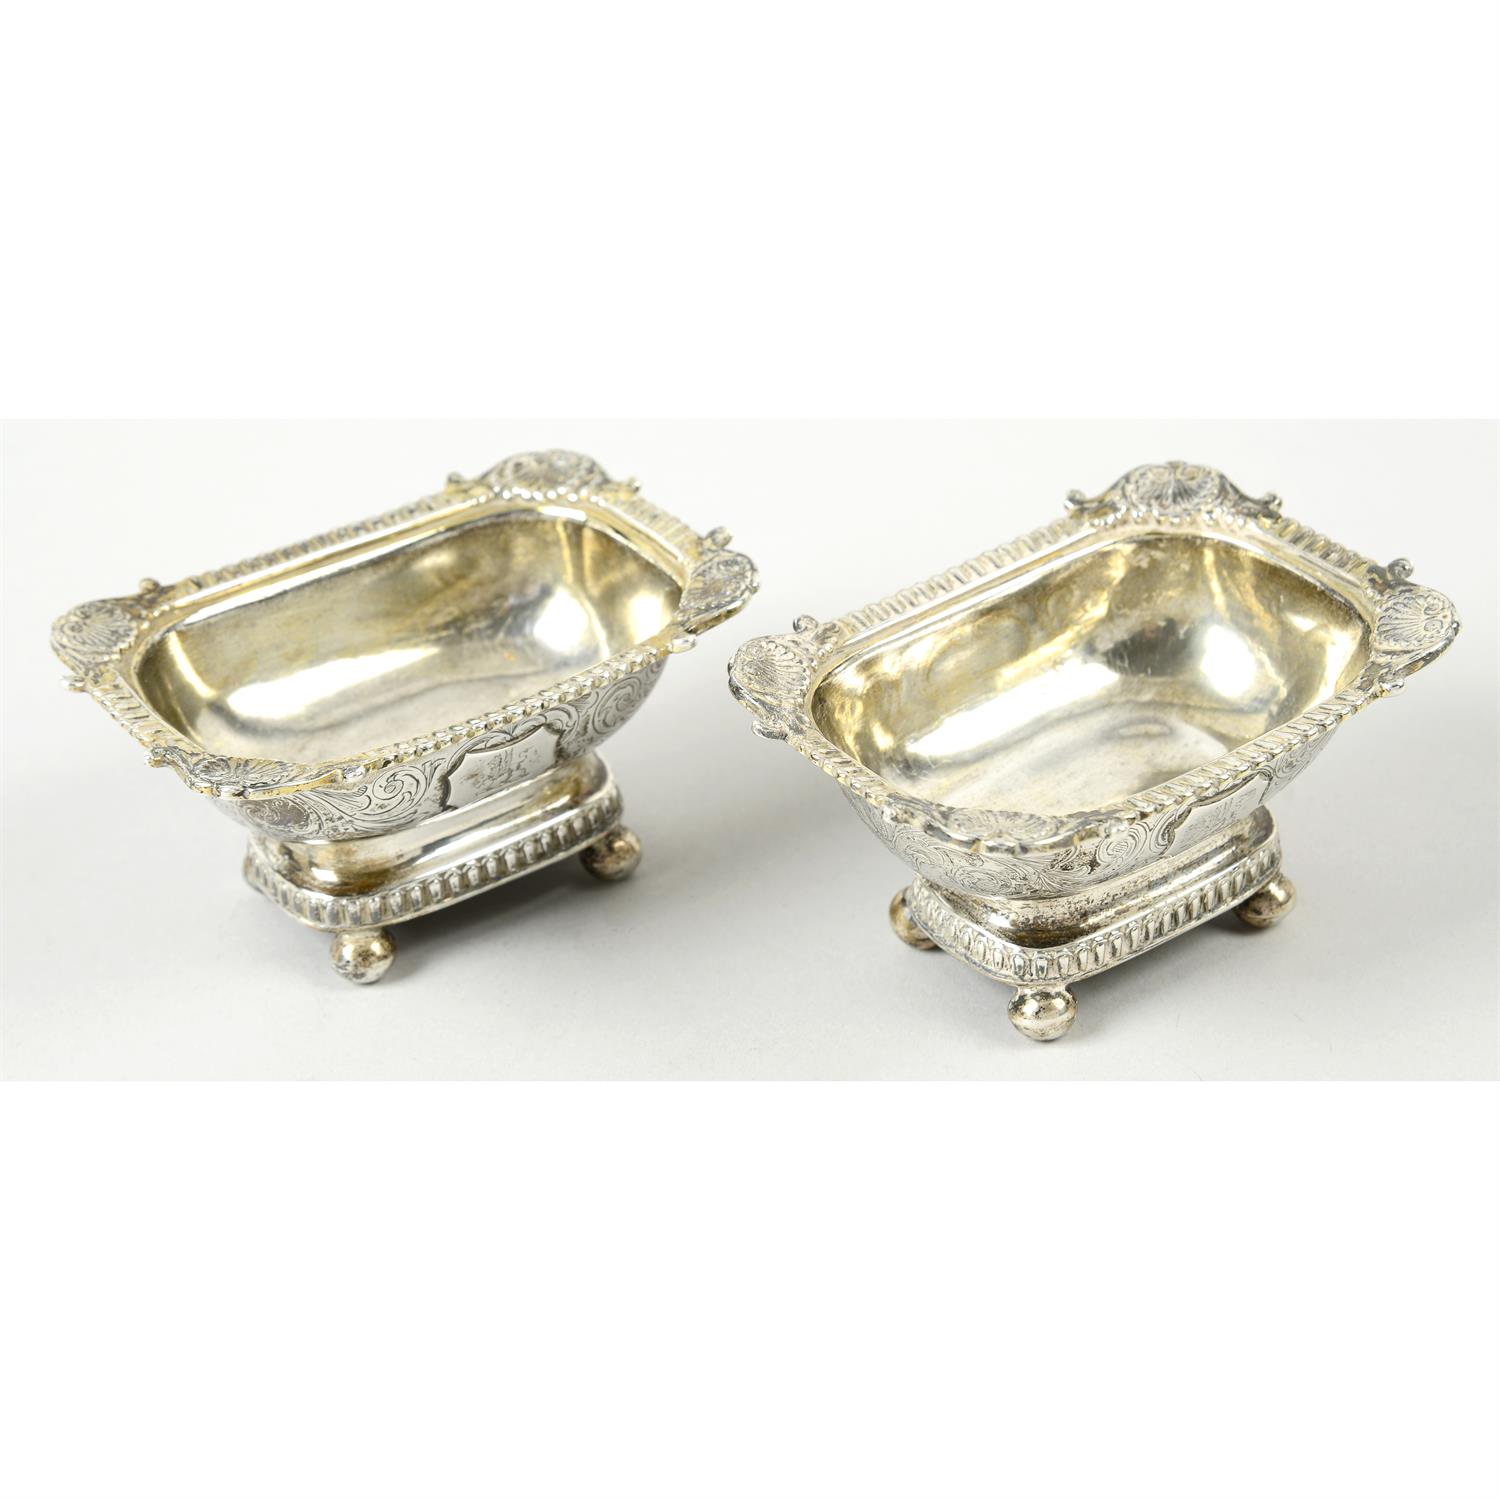 A matched pair of George III Scottish silver pedestal salts.